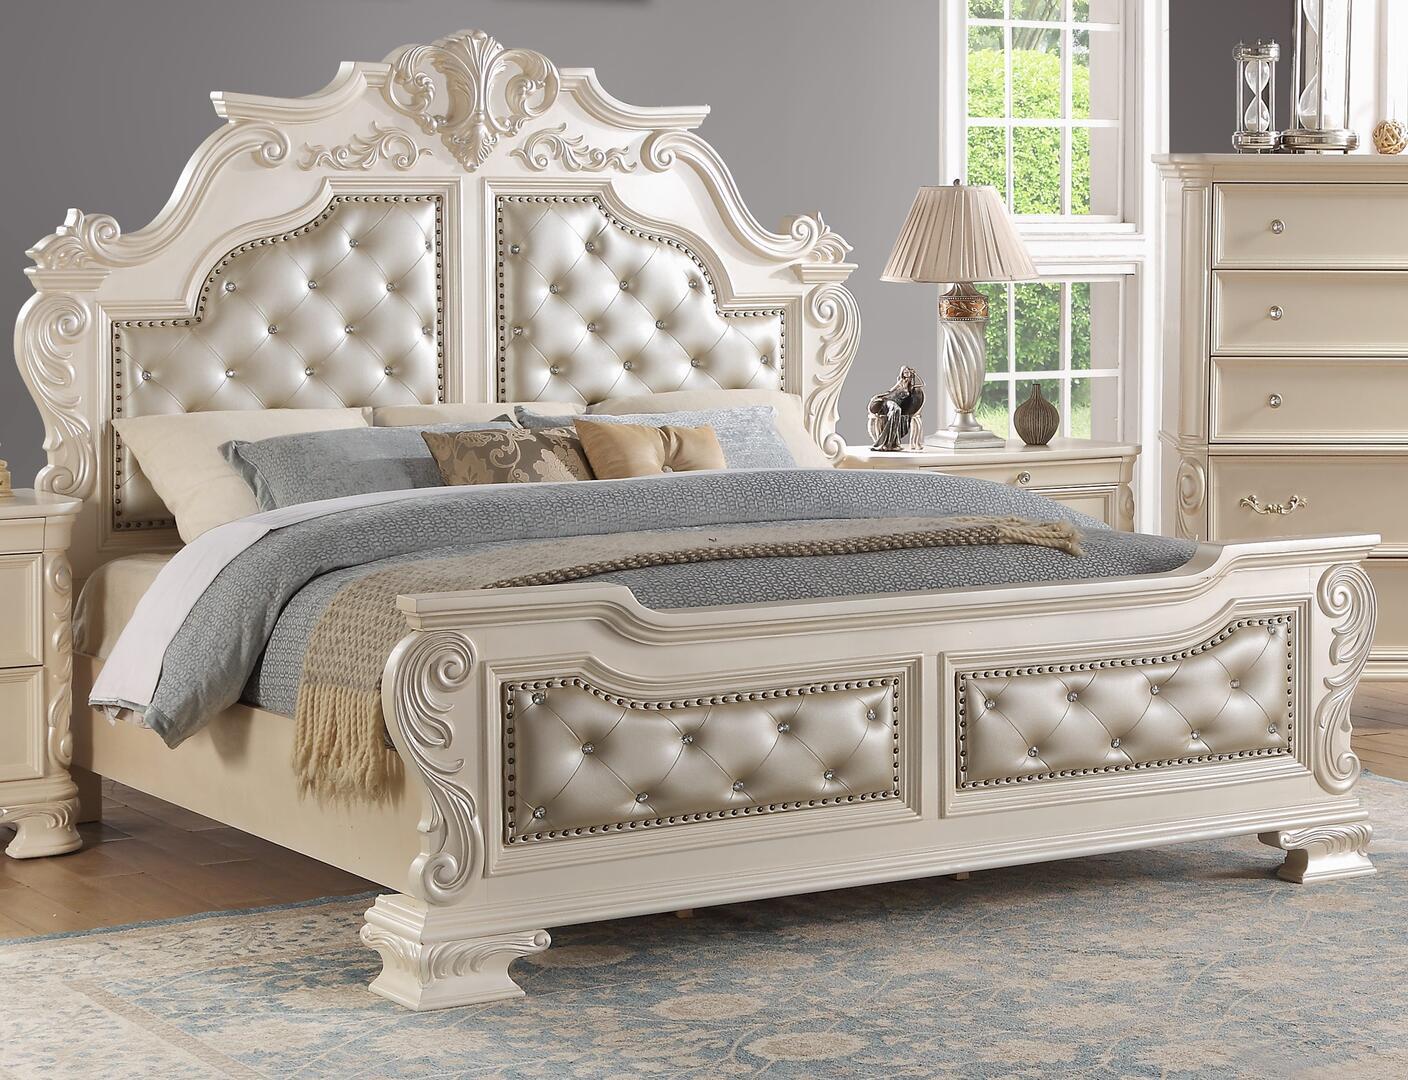 Traditional Panel Bed Victoria Victoria-Q-Bed in White Faux Leather